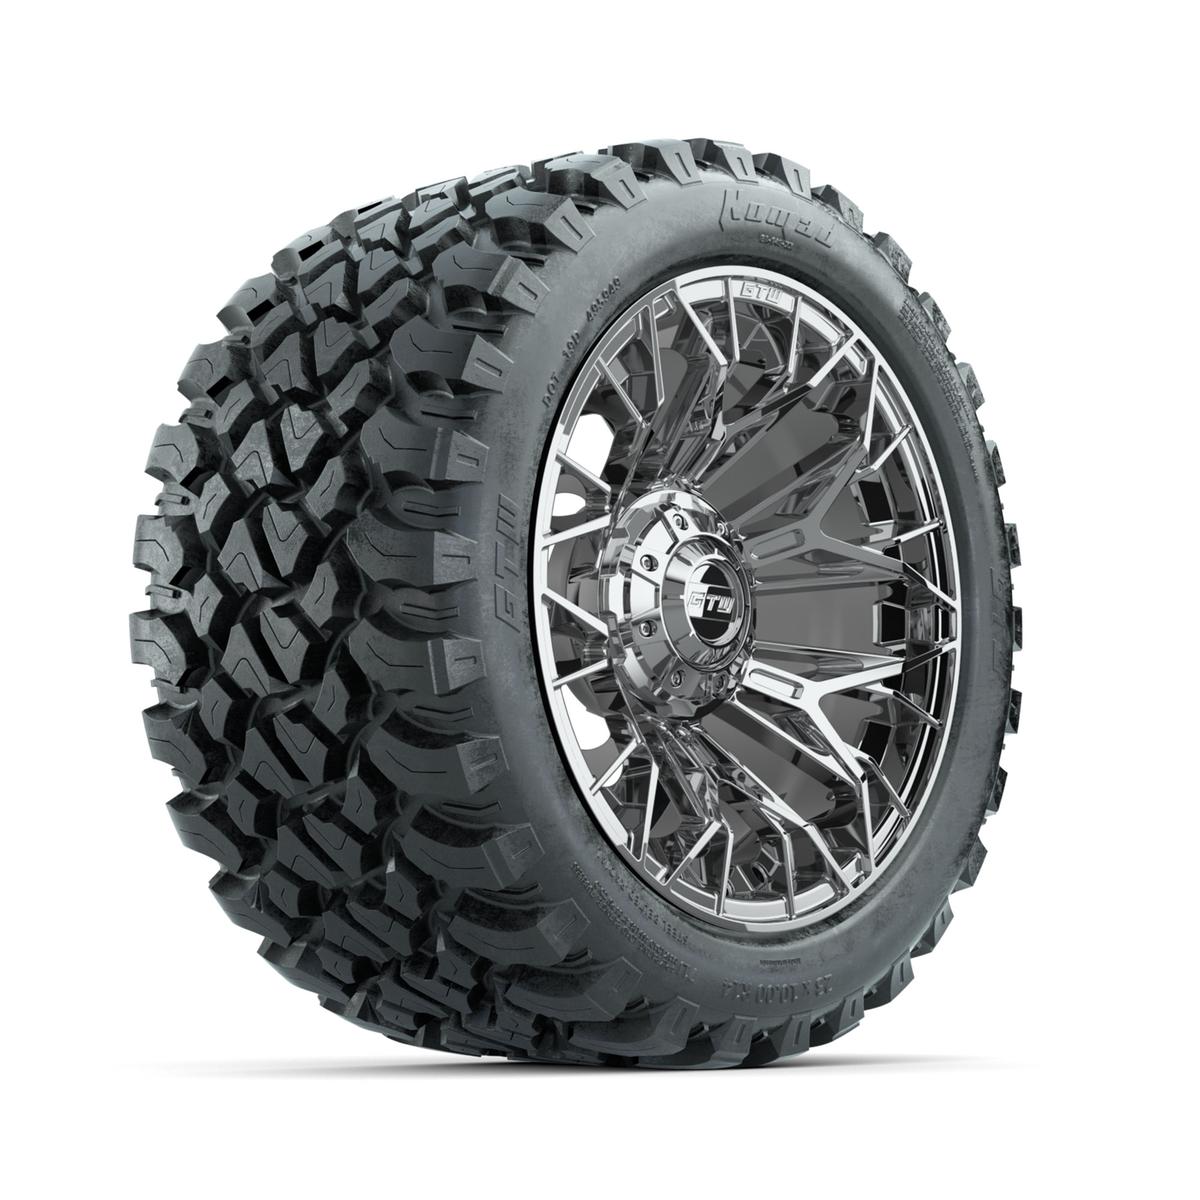 Set of (4) 14 in GTW® Stellar Chrome Wheels with 23x10-R14 Nomad All-Terrain Tires